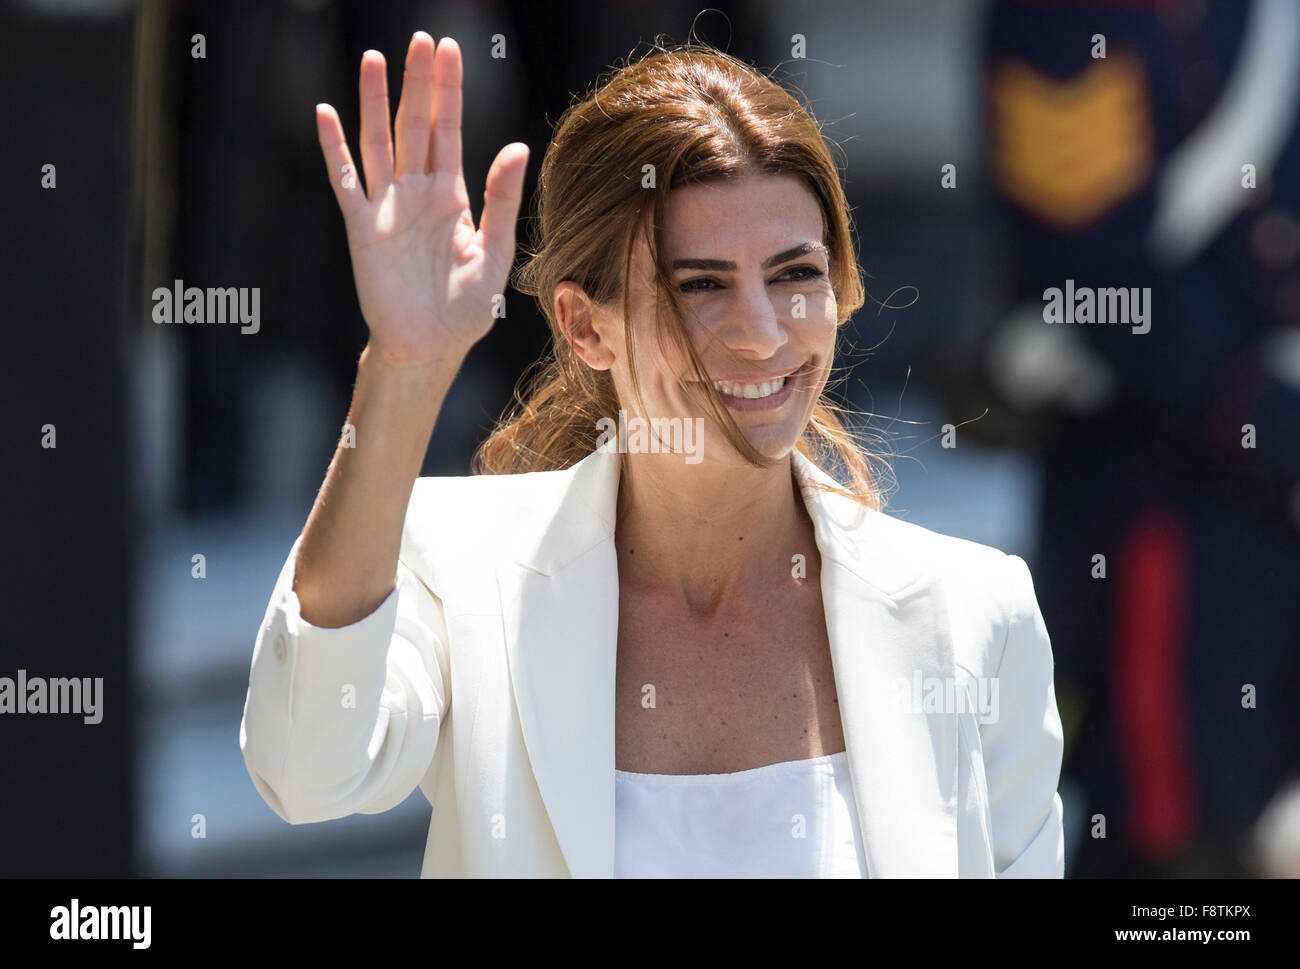 Buenos Aires, Argentina. 11th Dec, 2015. Argentina's First Lady Juliana Awada waves before participate in the Tedeum at the Metropolitan Cathedral in Buenos Aires, capital of Argentina, Dec. 11, 2015. According to local press, Argetina's President Mauricio Macri Friday attended the traditional religious service at the Metropolital Cathedral, the day after his pesidential inauguration. Credit:  Martin Zabala/Xinhua/Alamy Live News Stock Photo